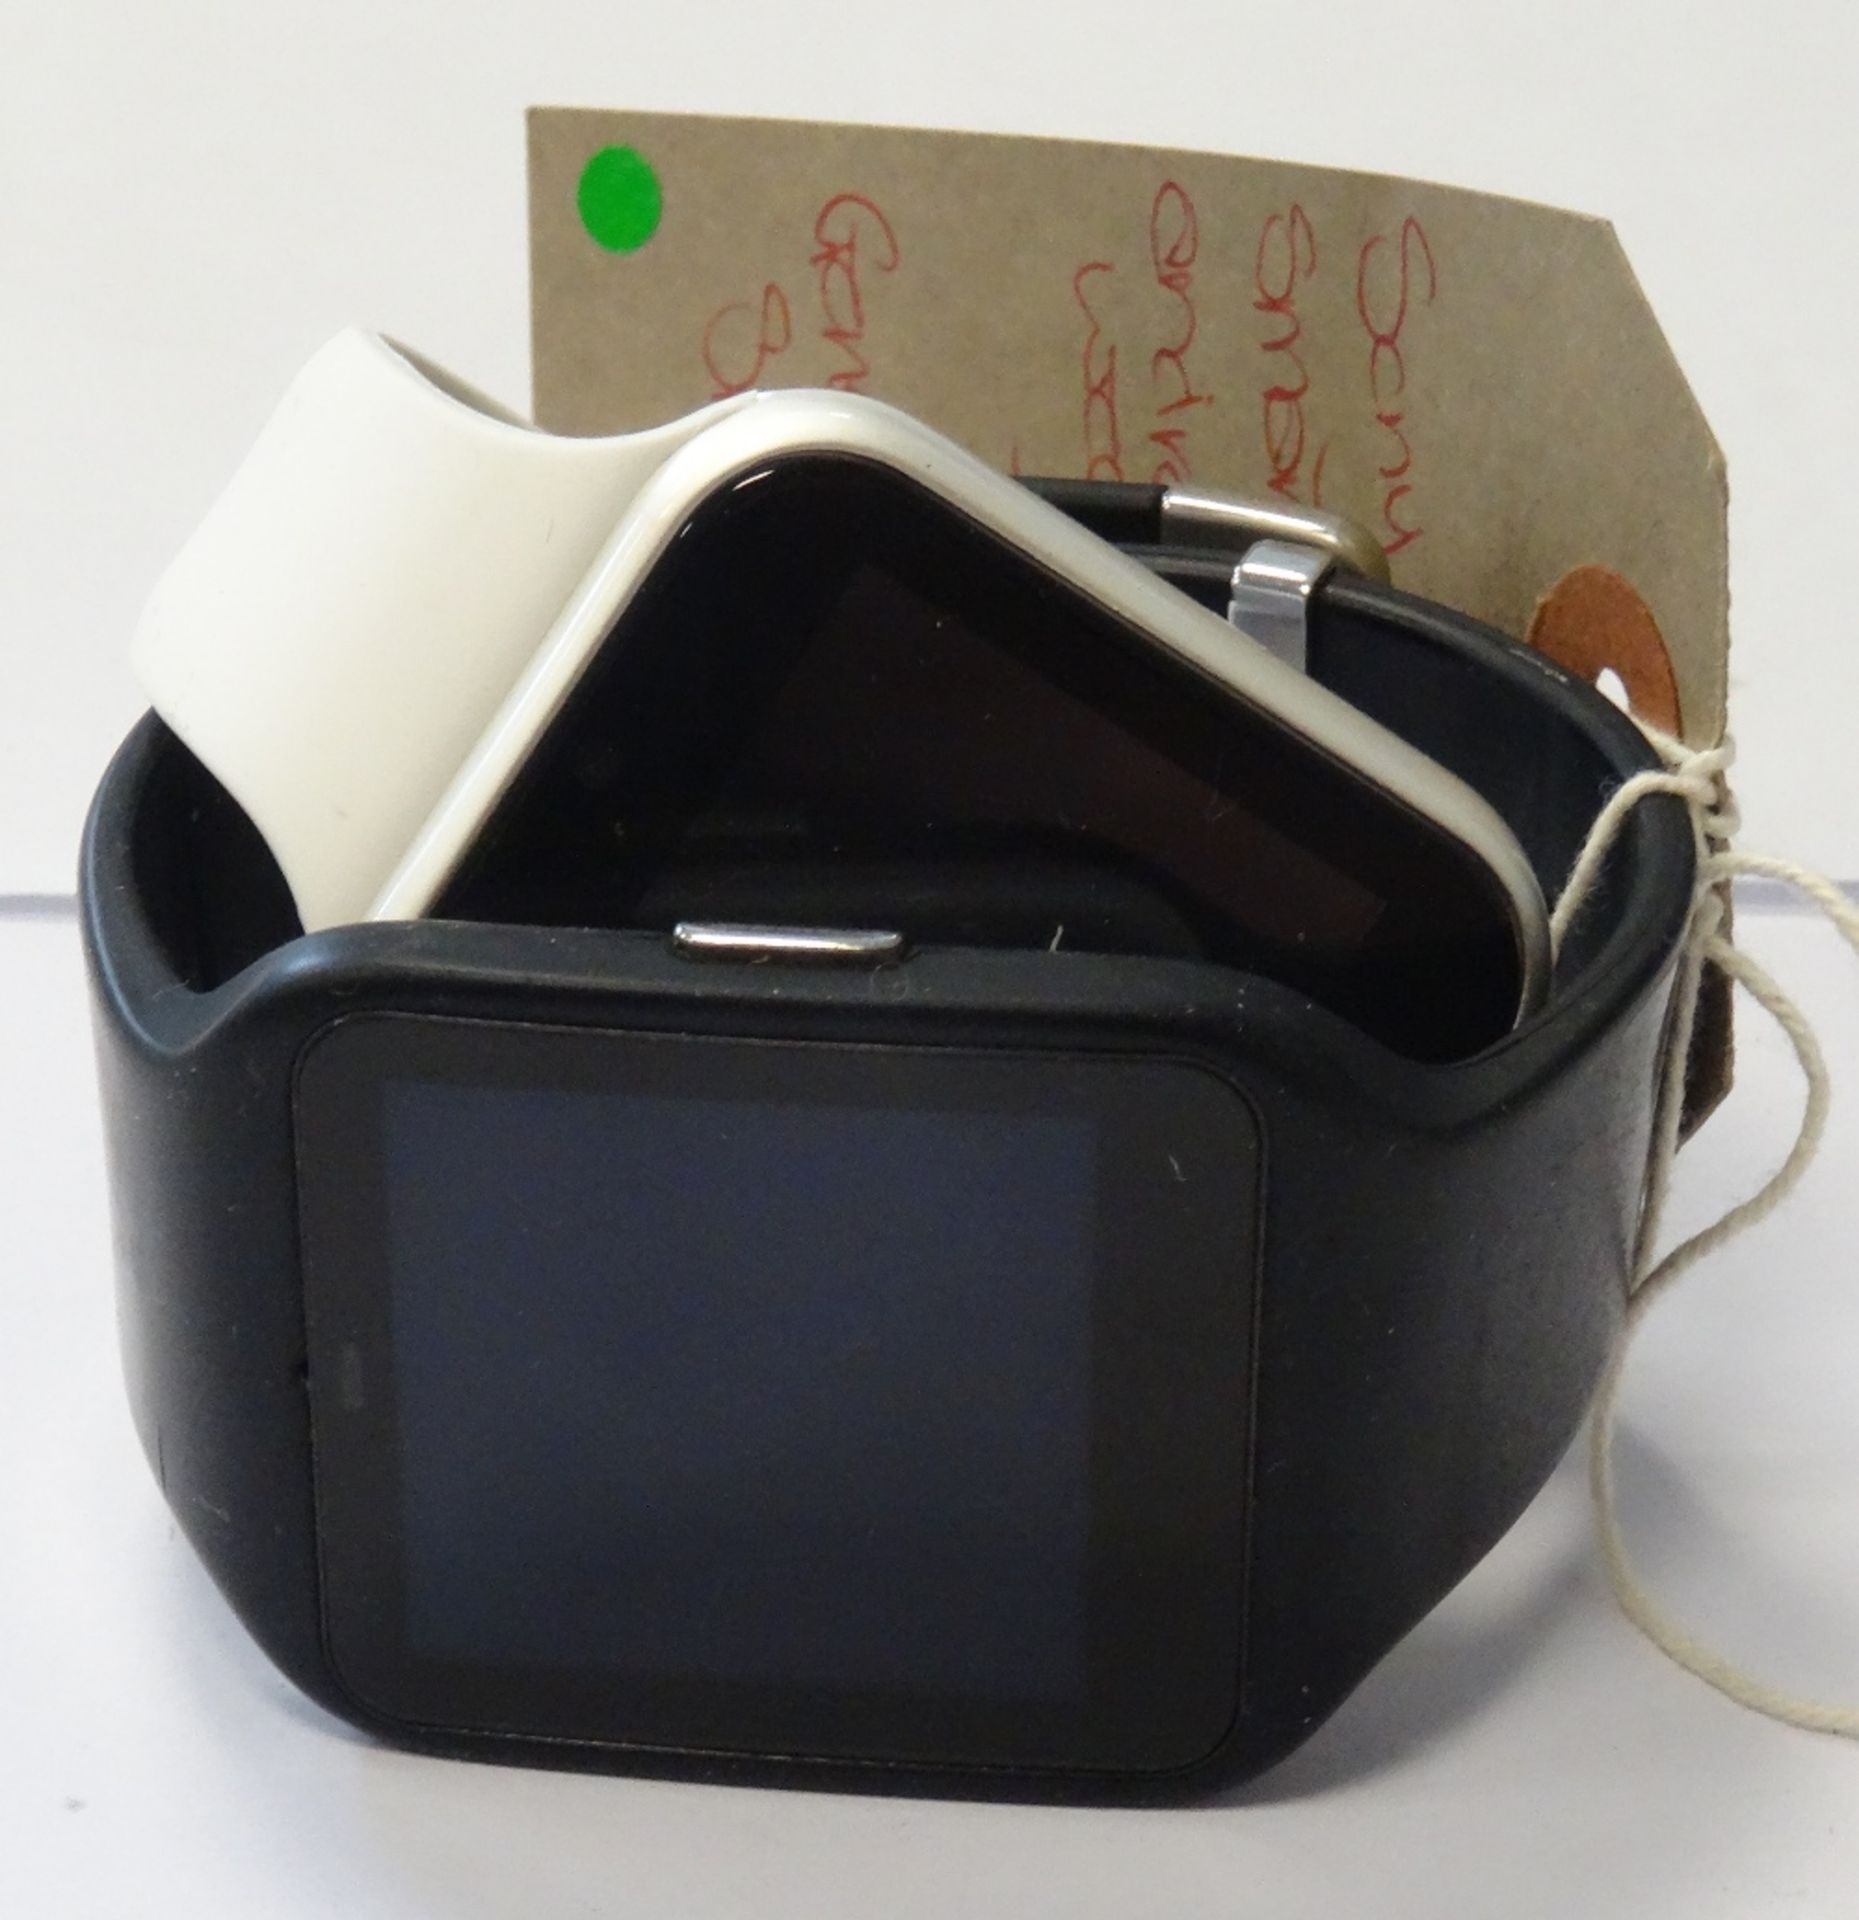 TWO SMARTWATCHES comprising: SONY SMARTWATCH 3 ANDROID WEAR and one UNBRANDED SMARTWATCH.